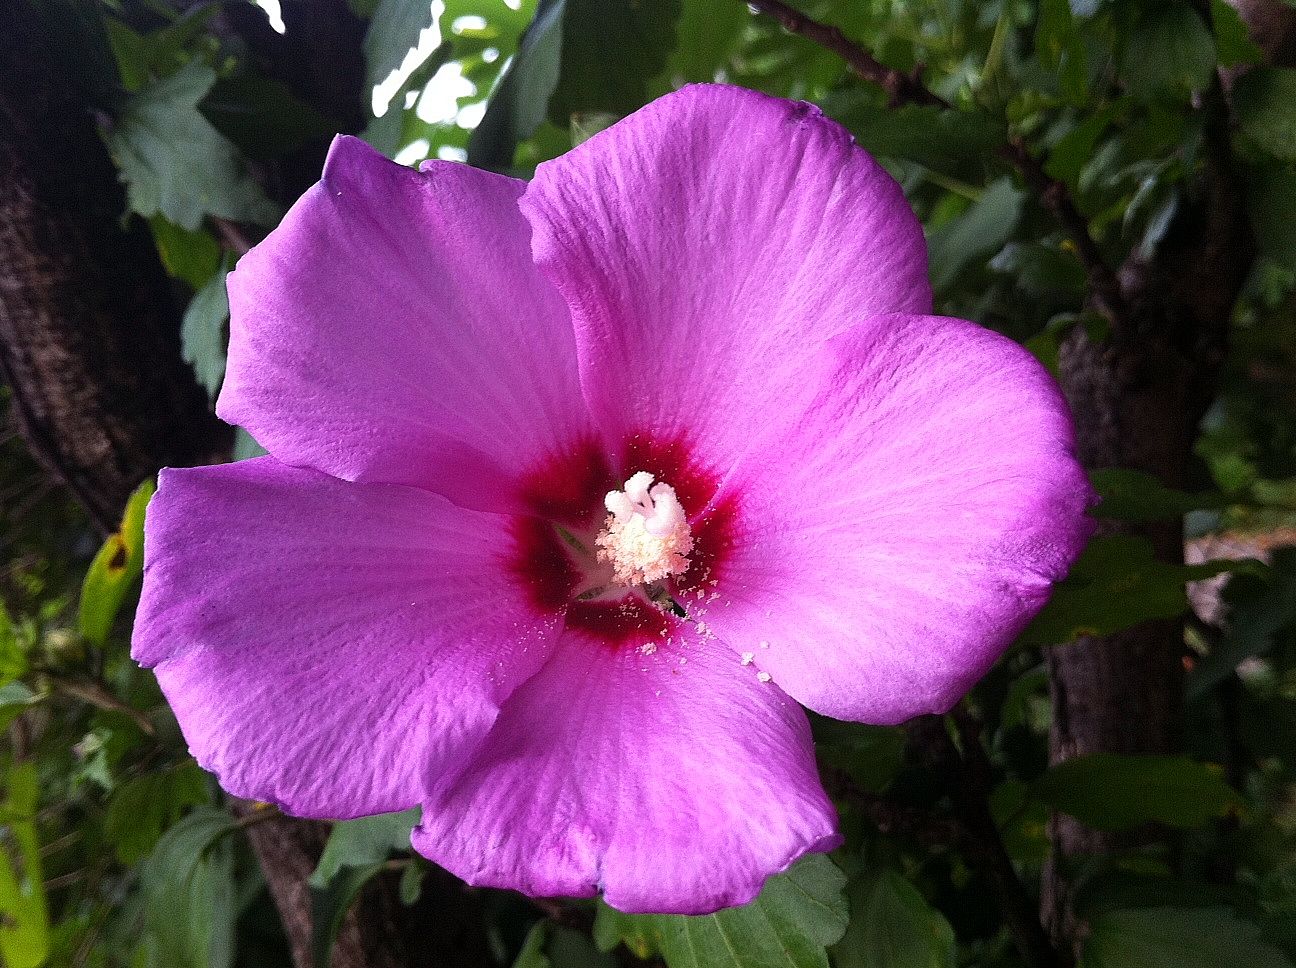 Rose of Sharon has bloomed!